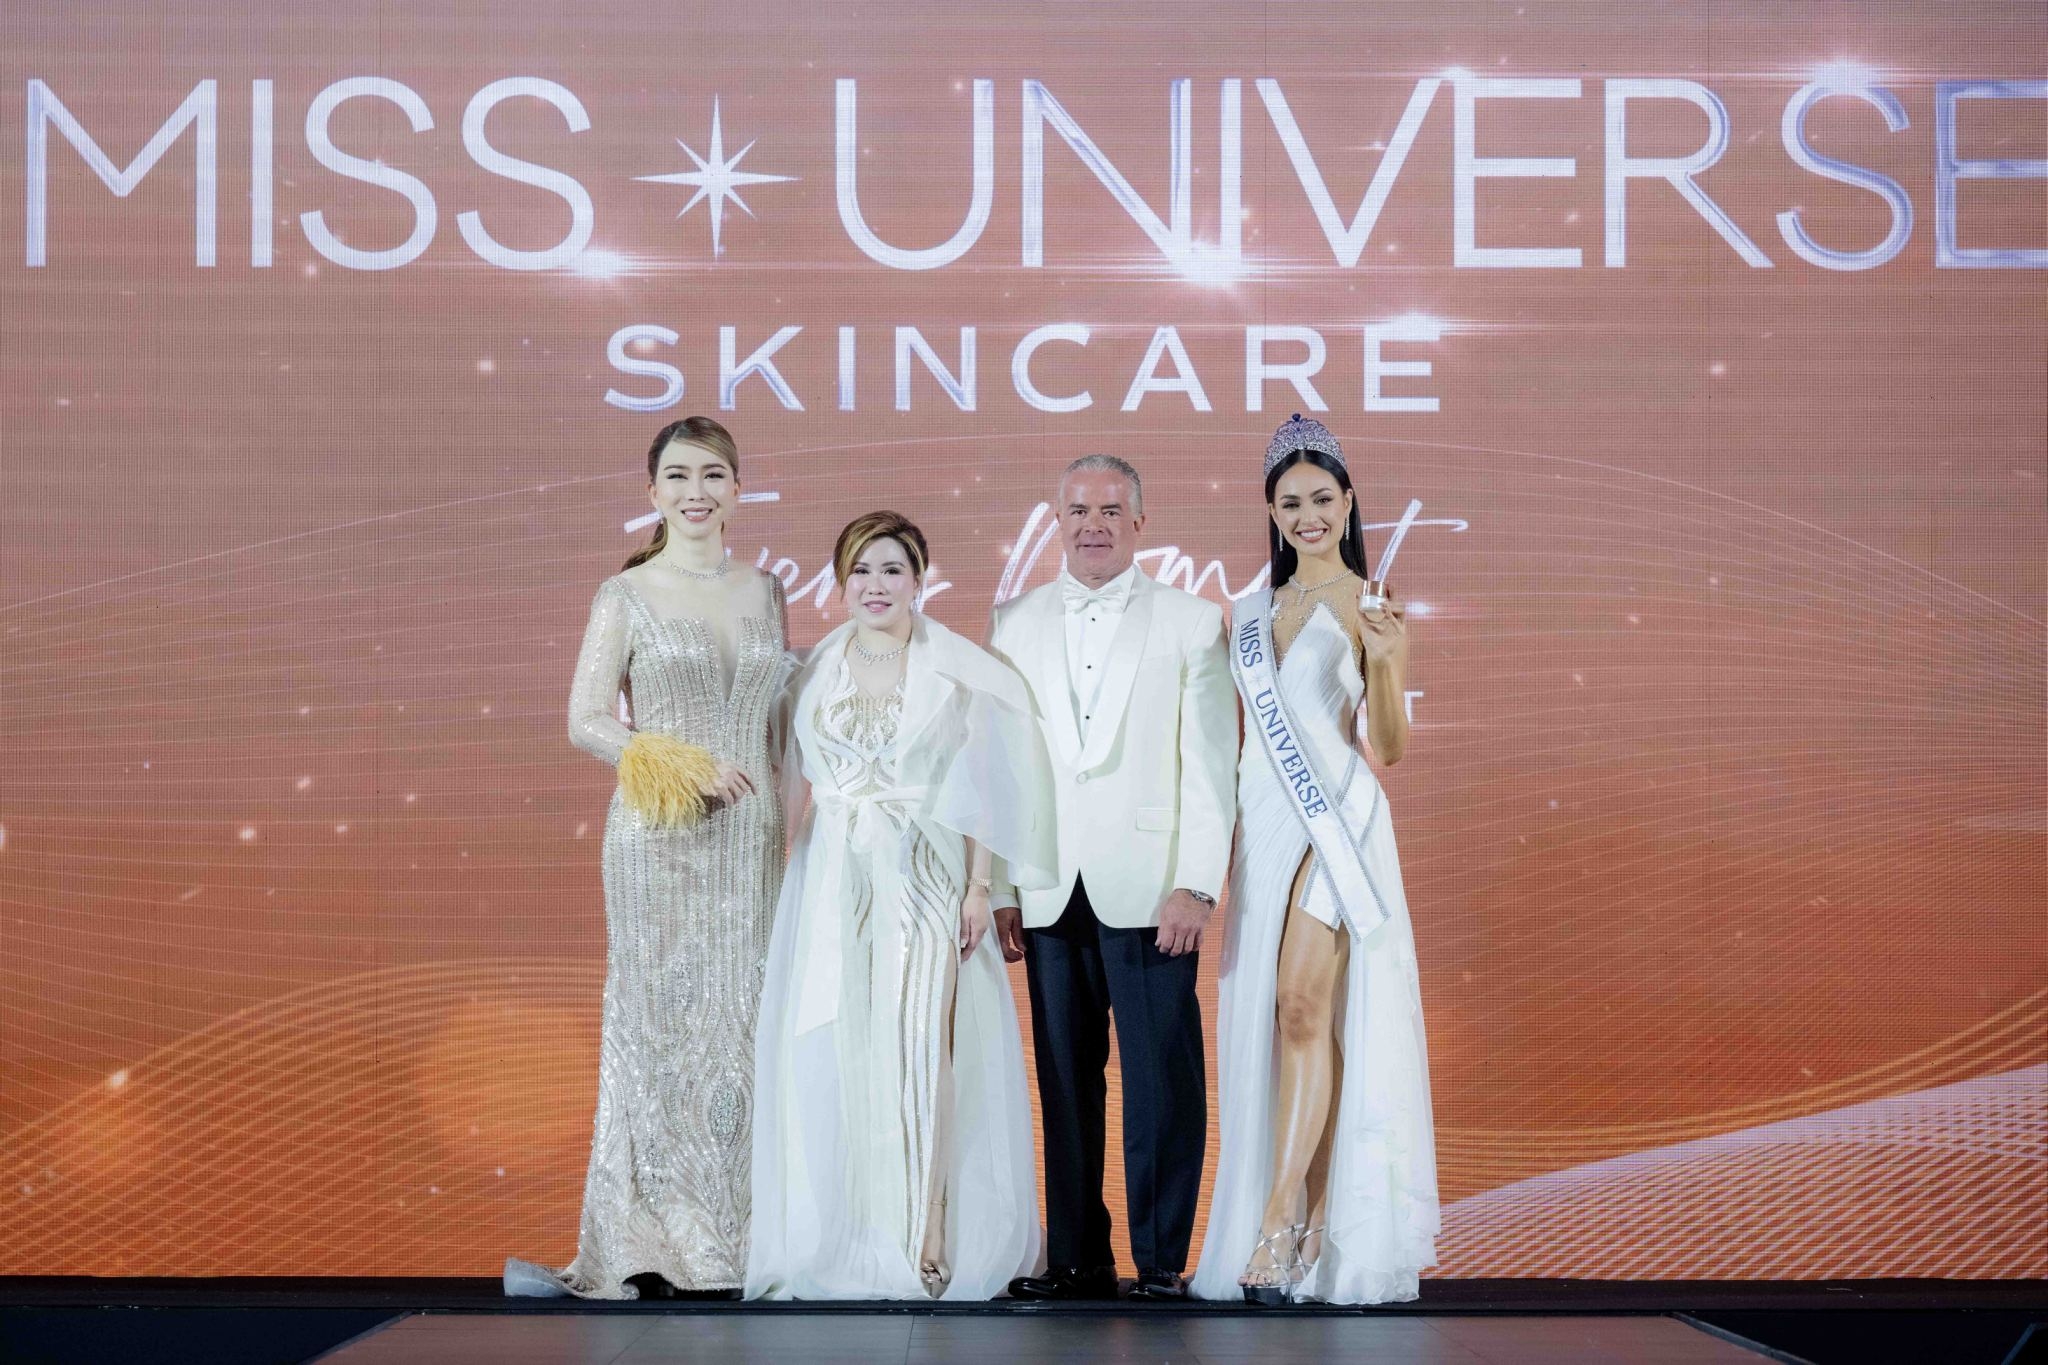 Founders of Miss Universe Skincare and R